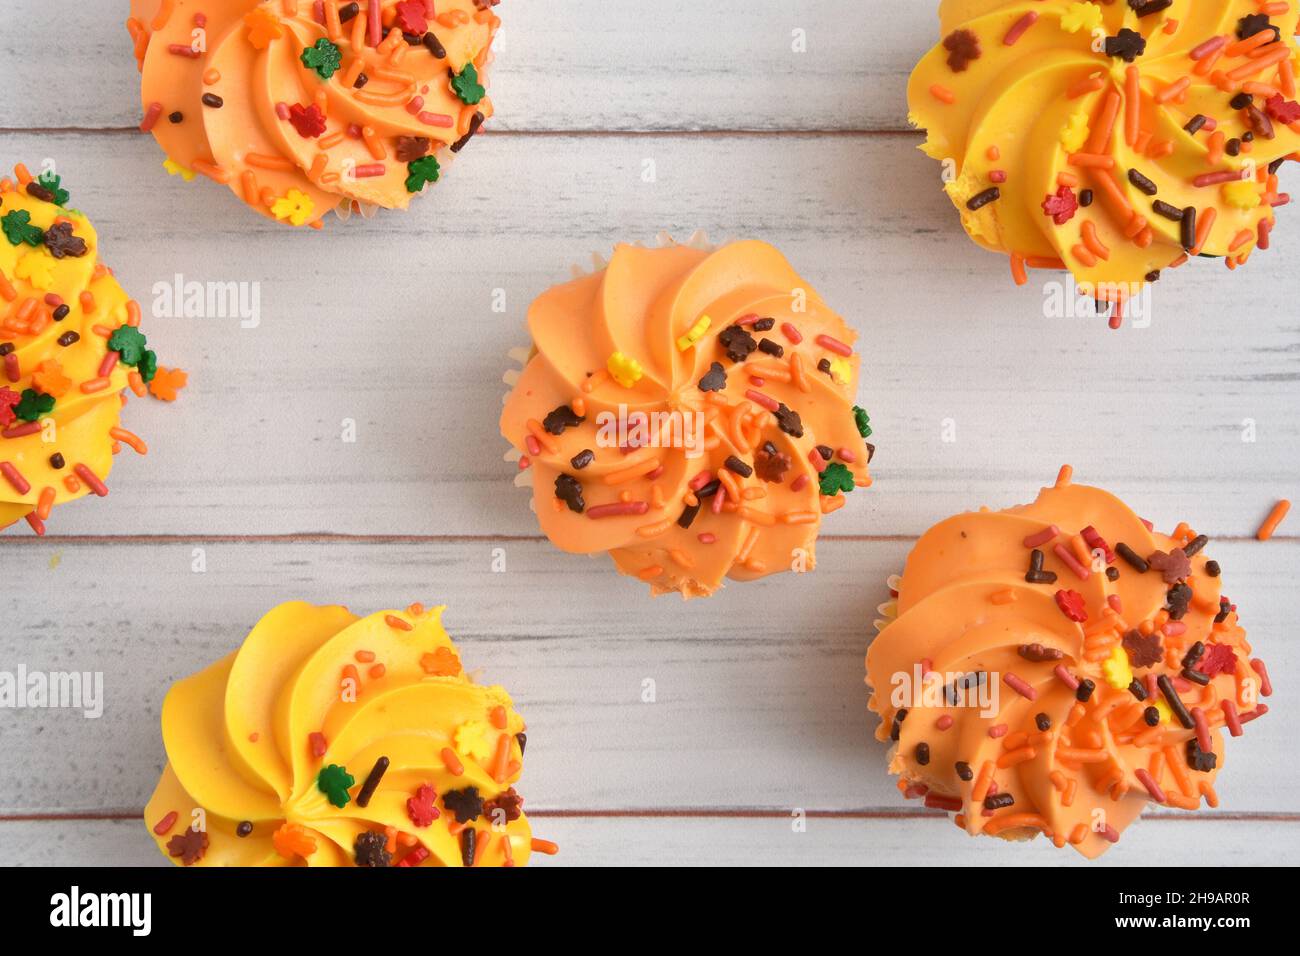 Festive holiday or Halloween cupcakes on a rustic white wooden table, overhead view Stock Photo